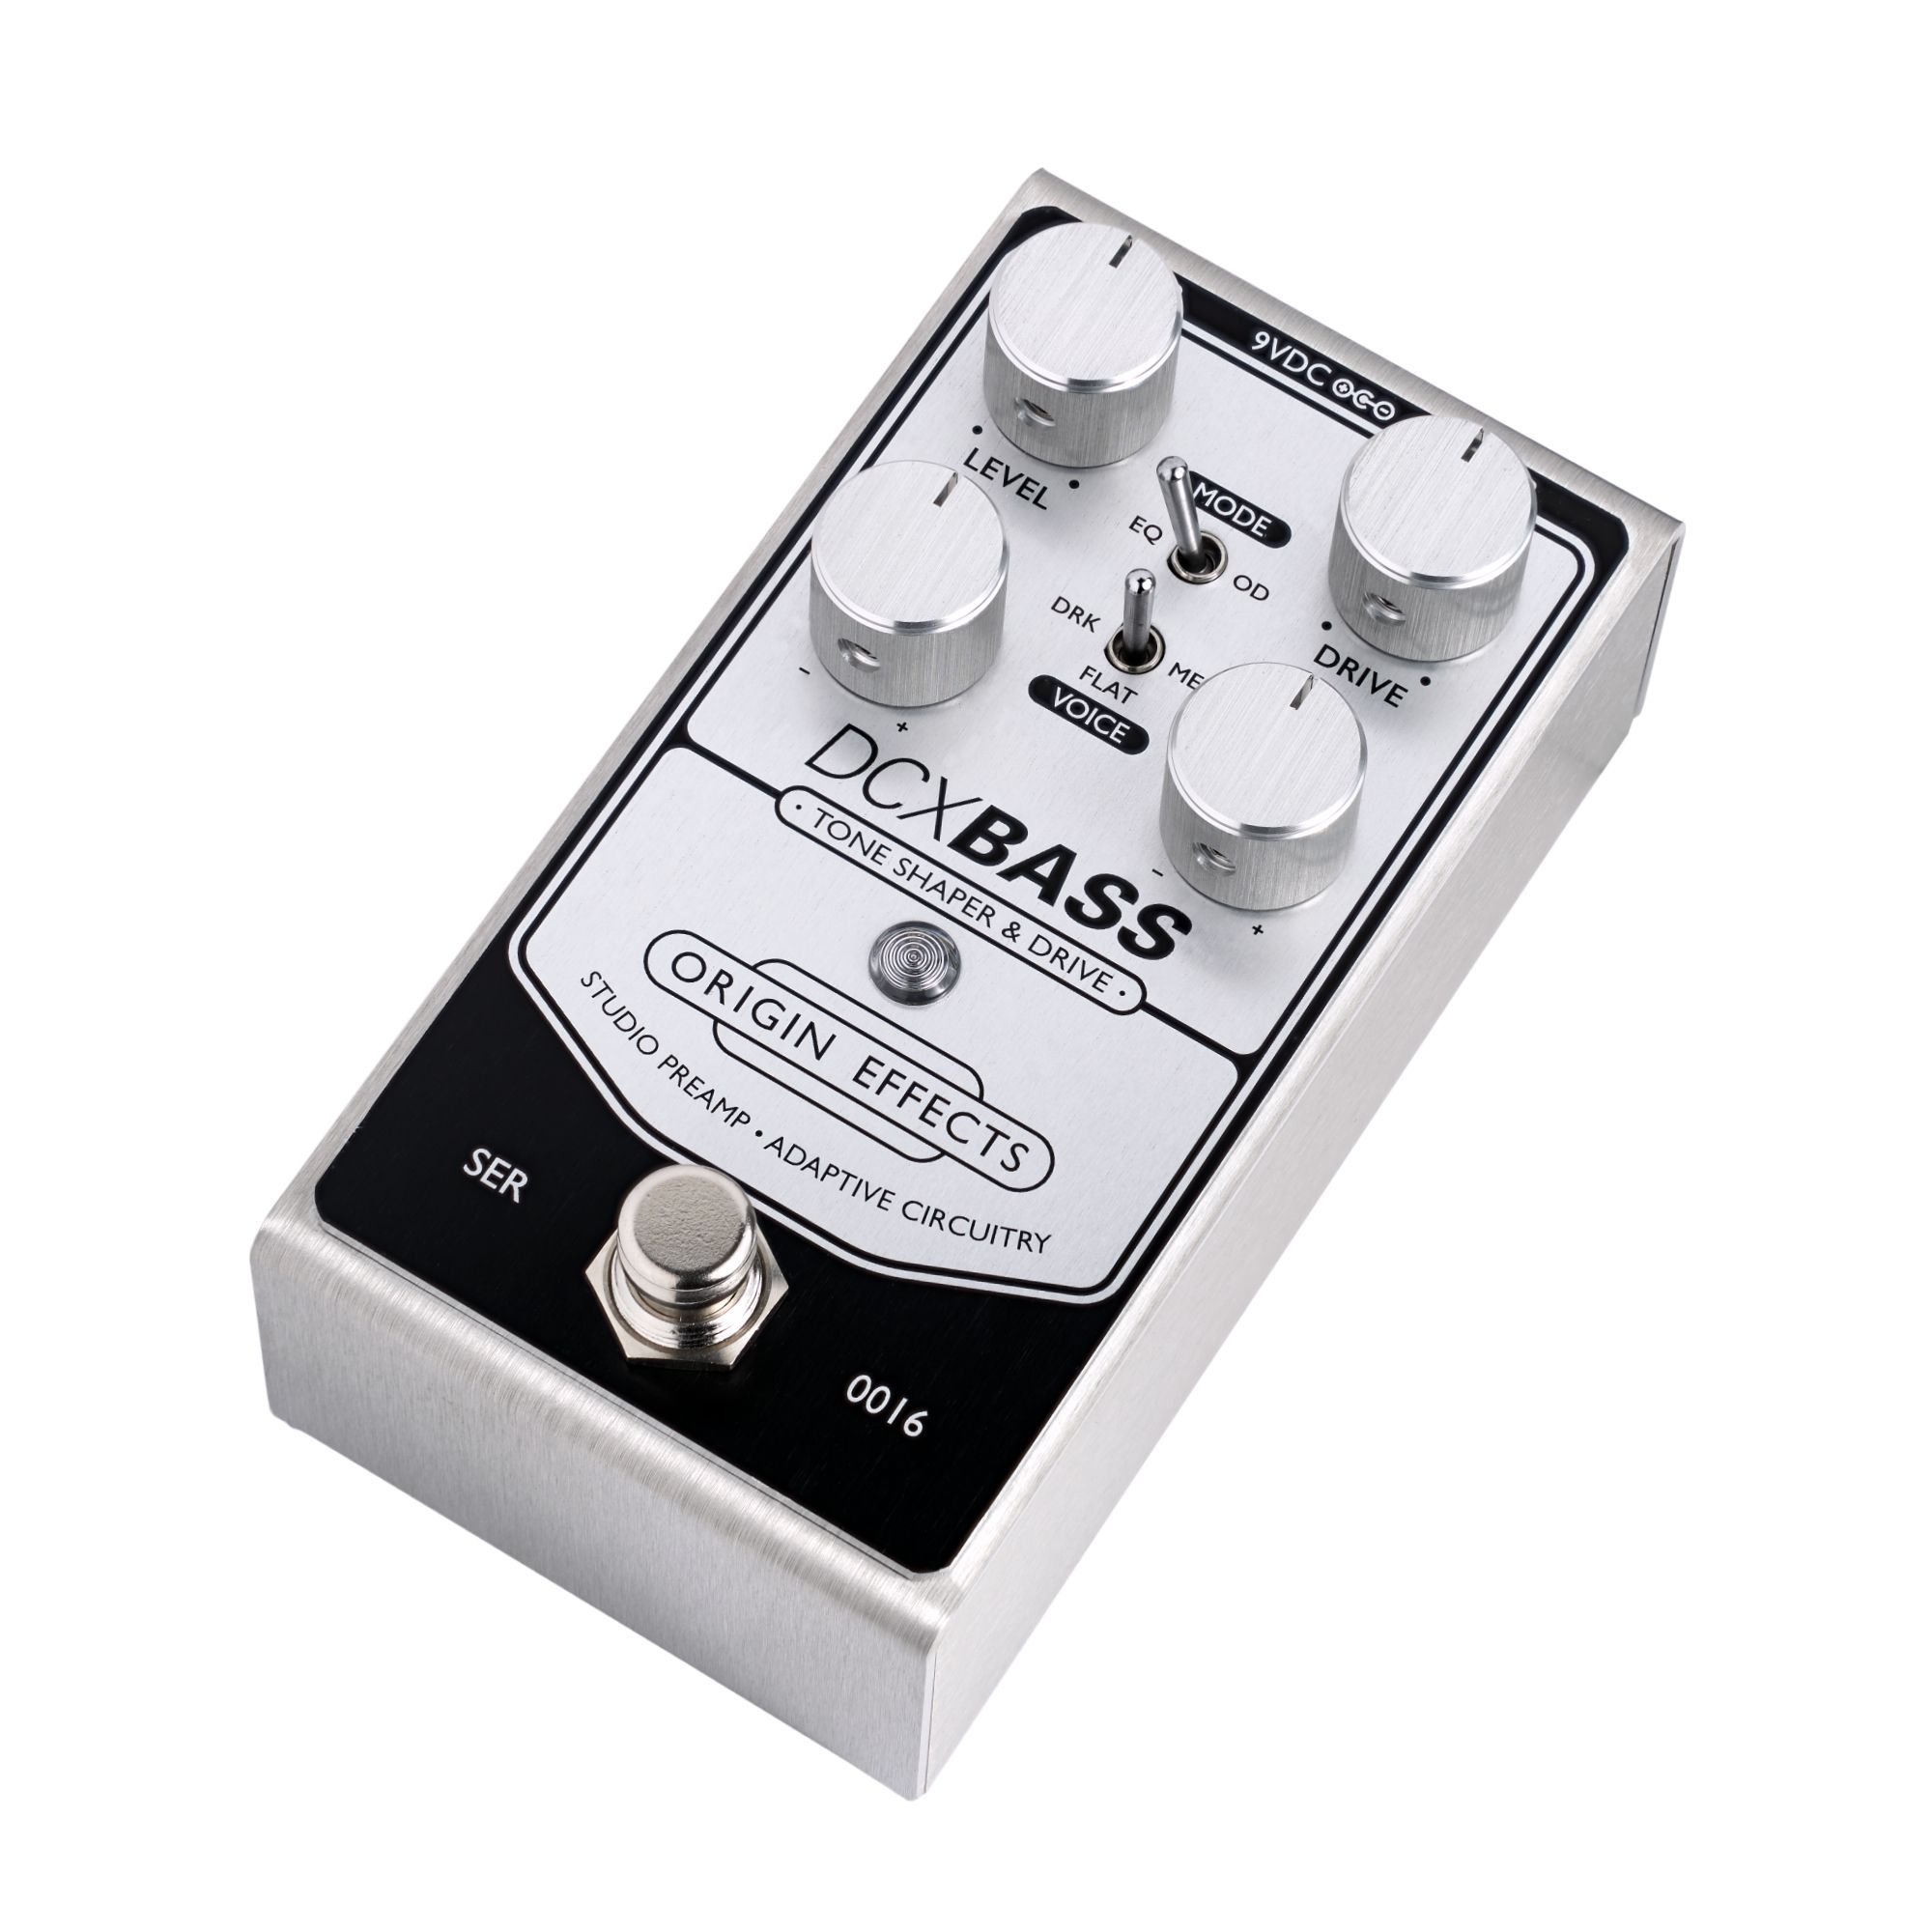 Origin Effects Dcx Bass - Compressor, sustain & noise gate effect pedal for bass - Variation 2